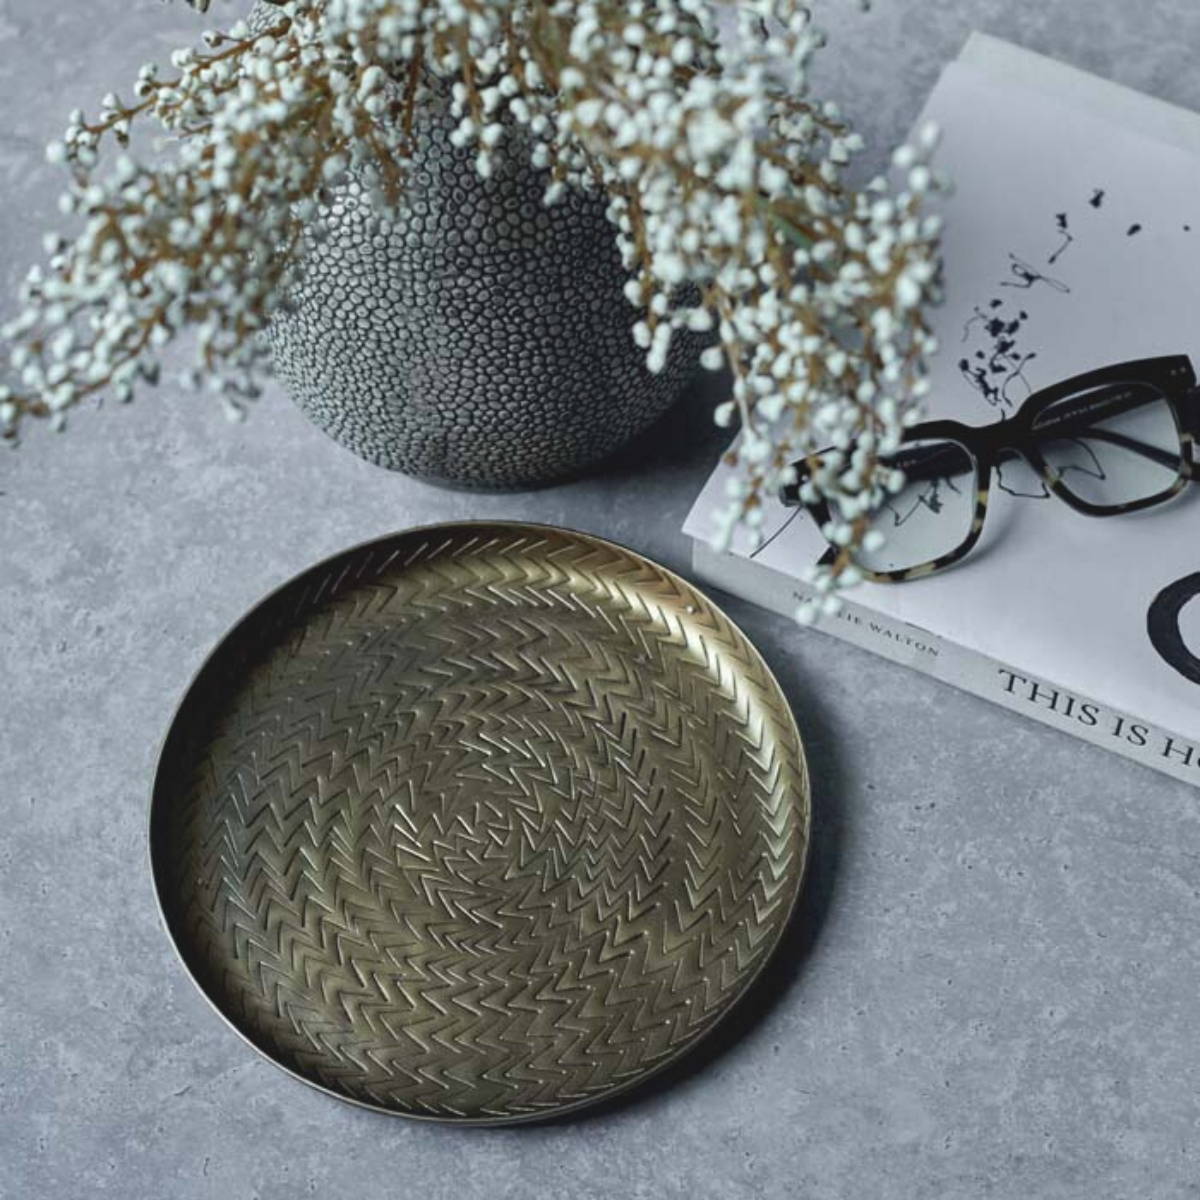 a small round brass tray with decorative detail next to a vase with some artificial flowers and some reading glasses and a book about home